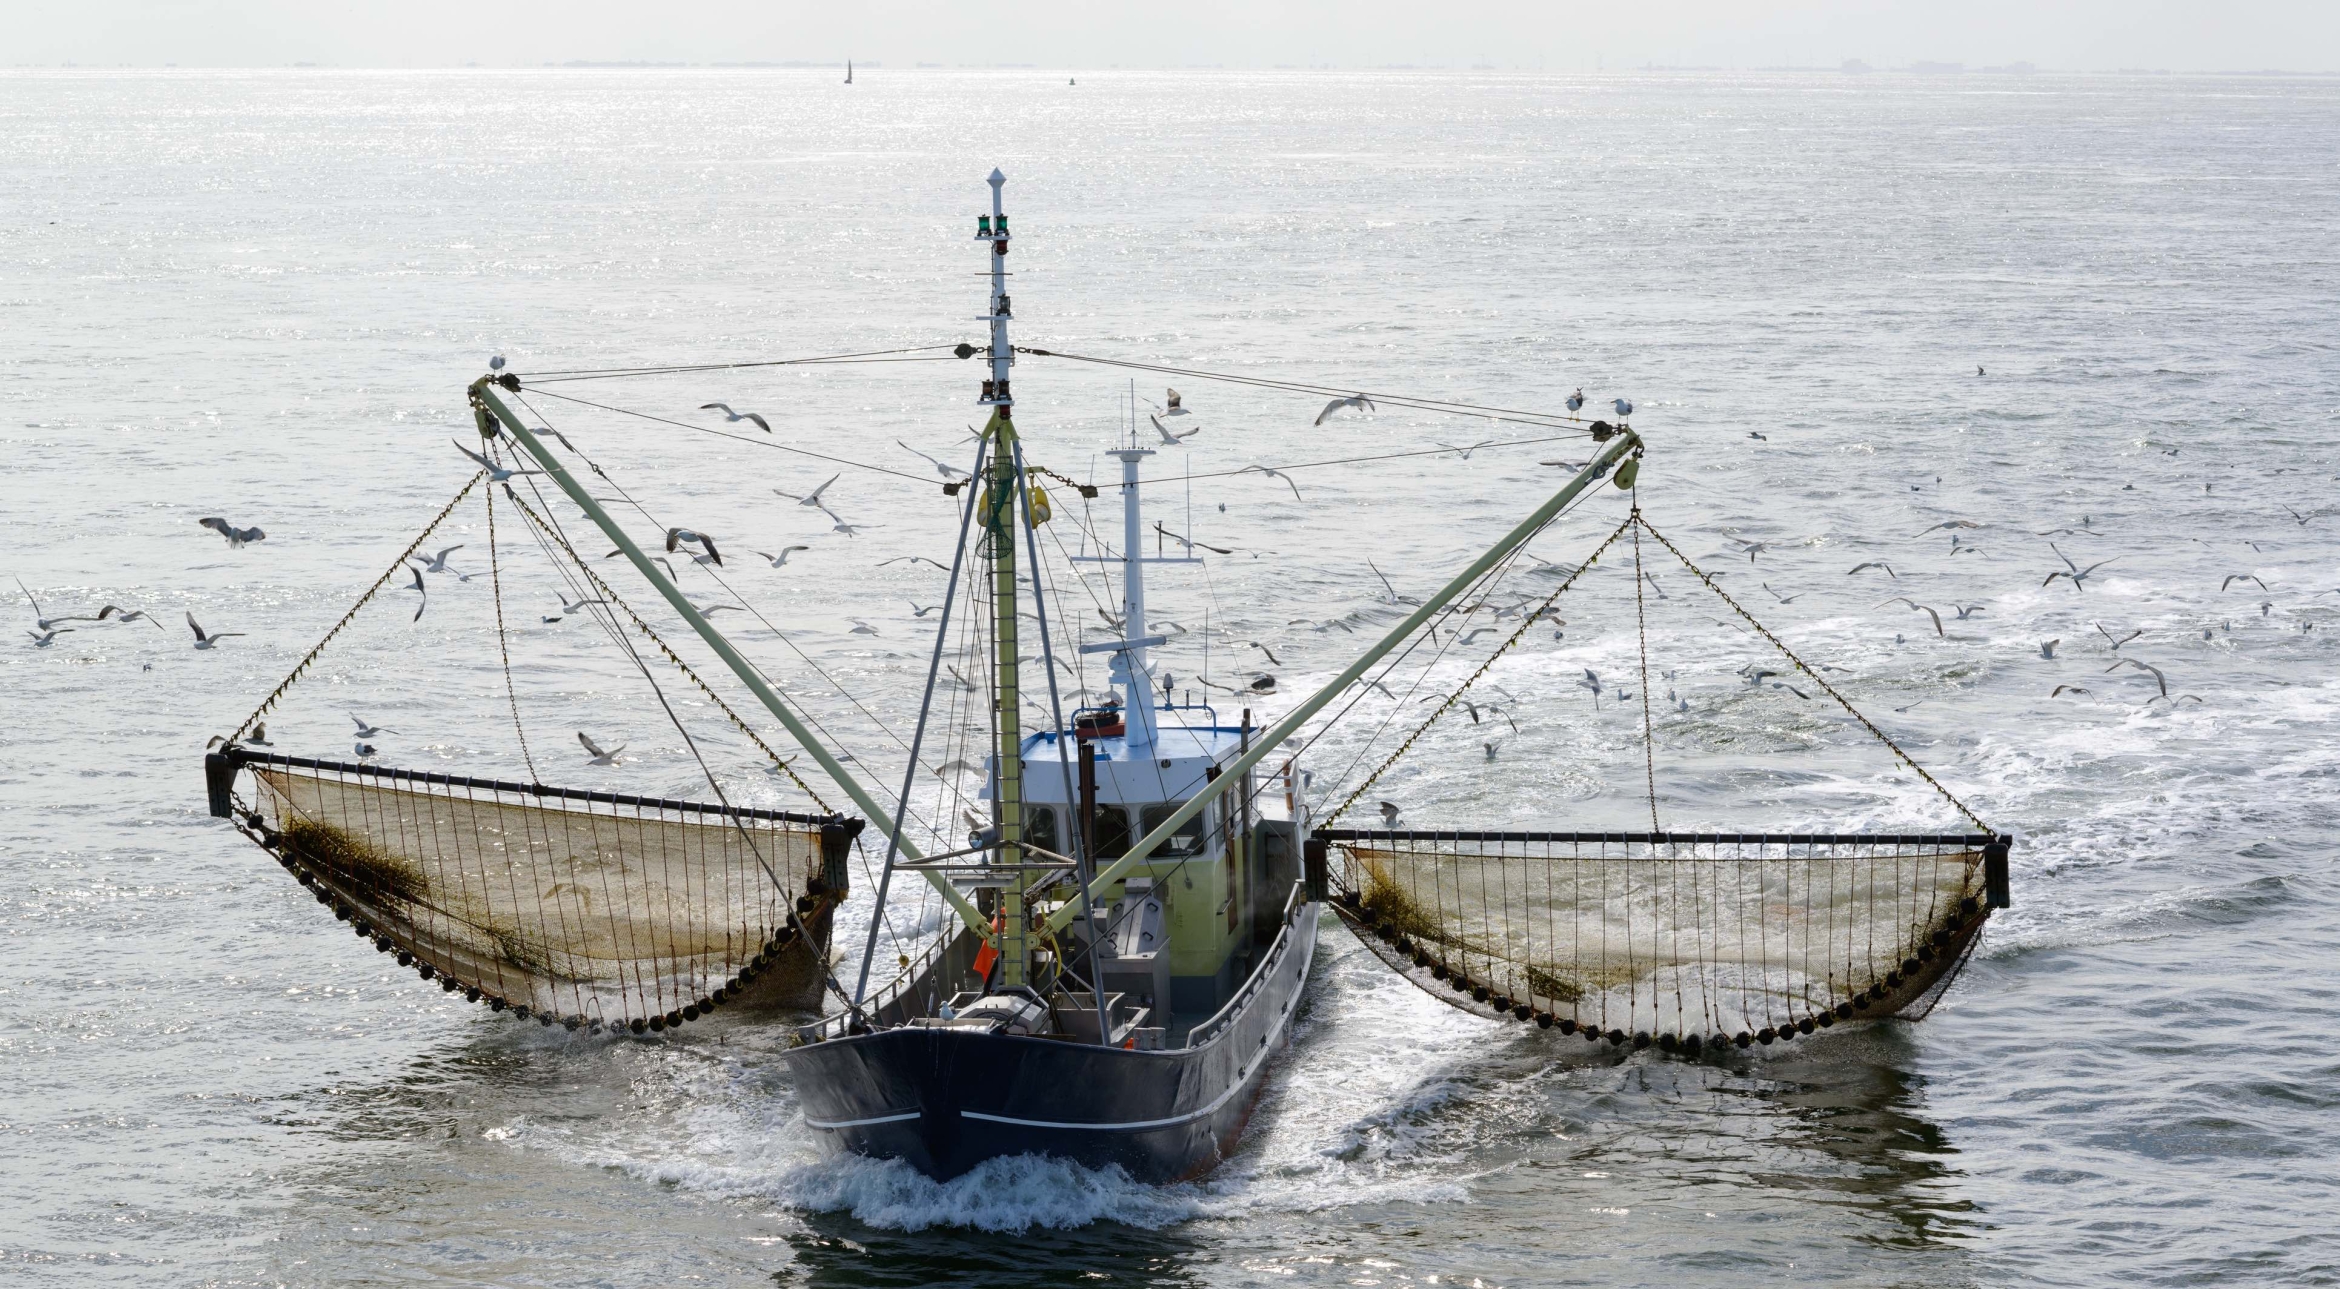 A fishing boat deploys its nets accompanied by a flock of gulls.  